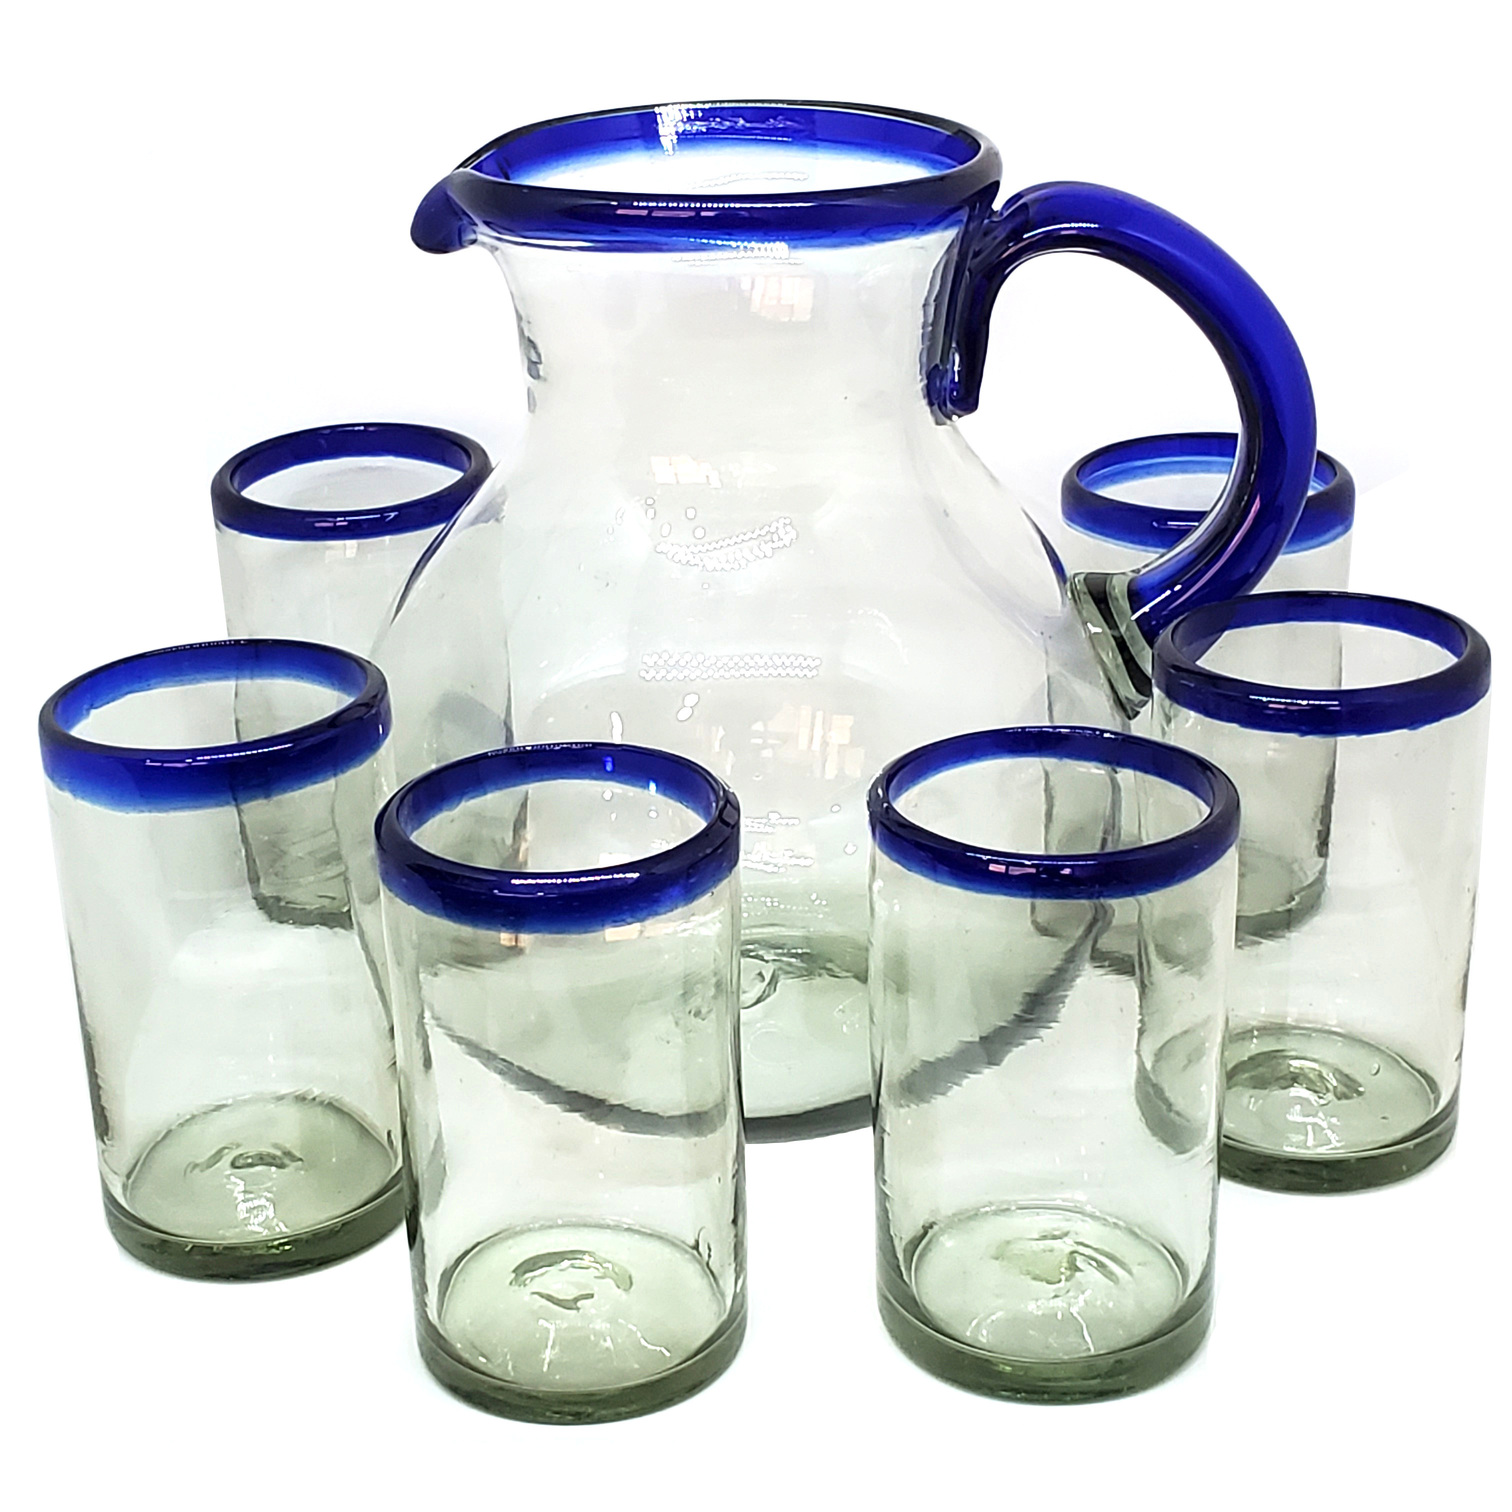 MEXICAN GLASSWARE / Cobalt Blue Rim 120 oz Pitcher and 6 Drinking Glasses set